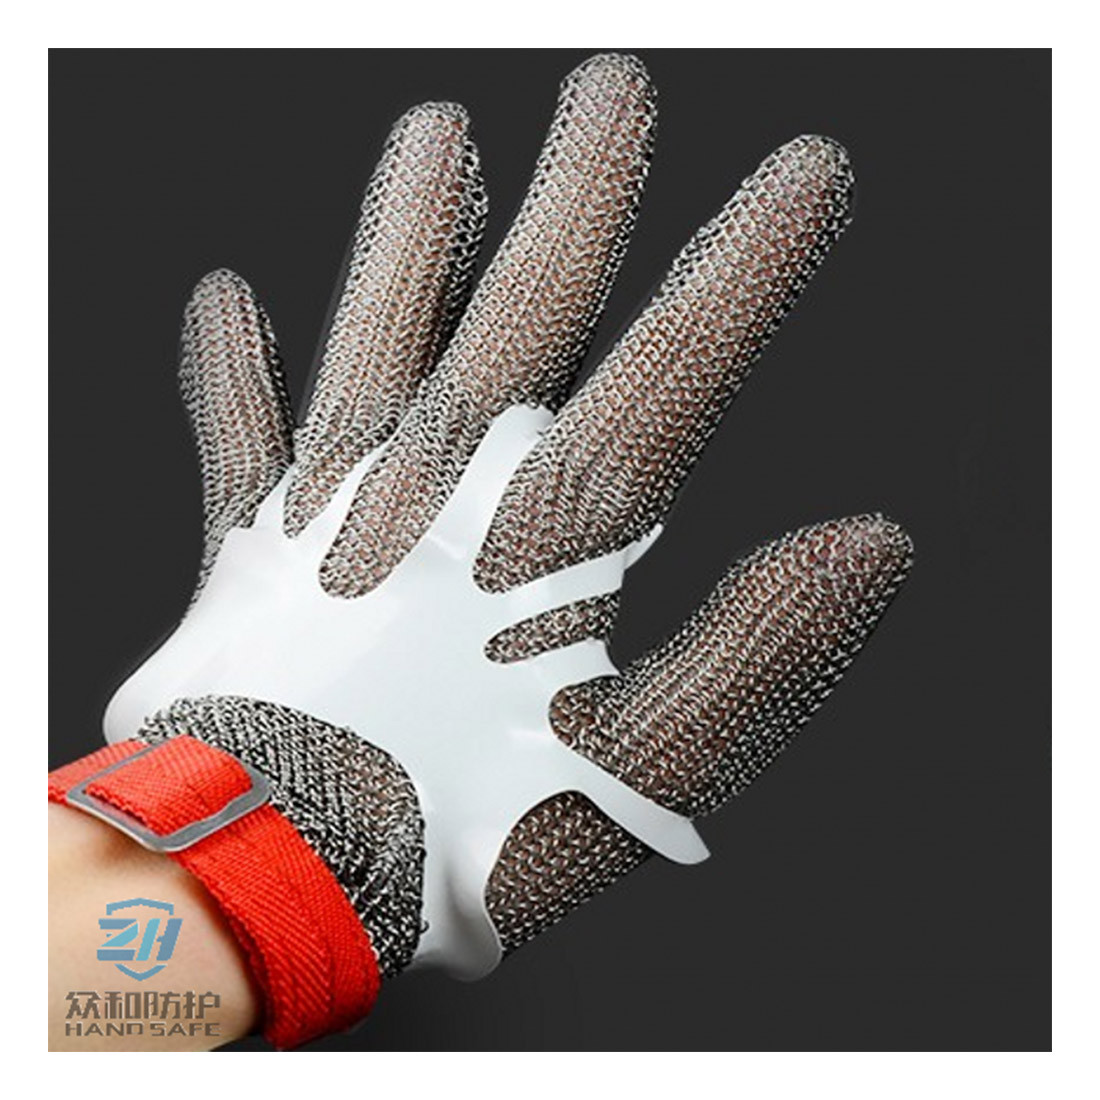 Glove Tensioner - Personal protection